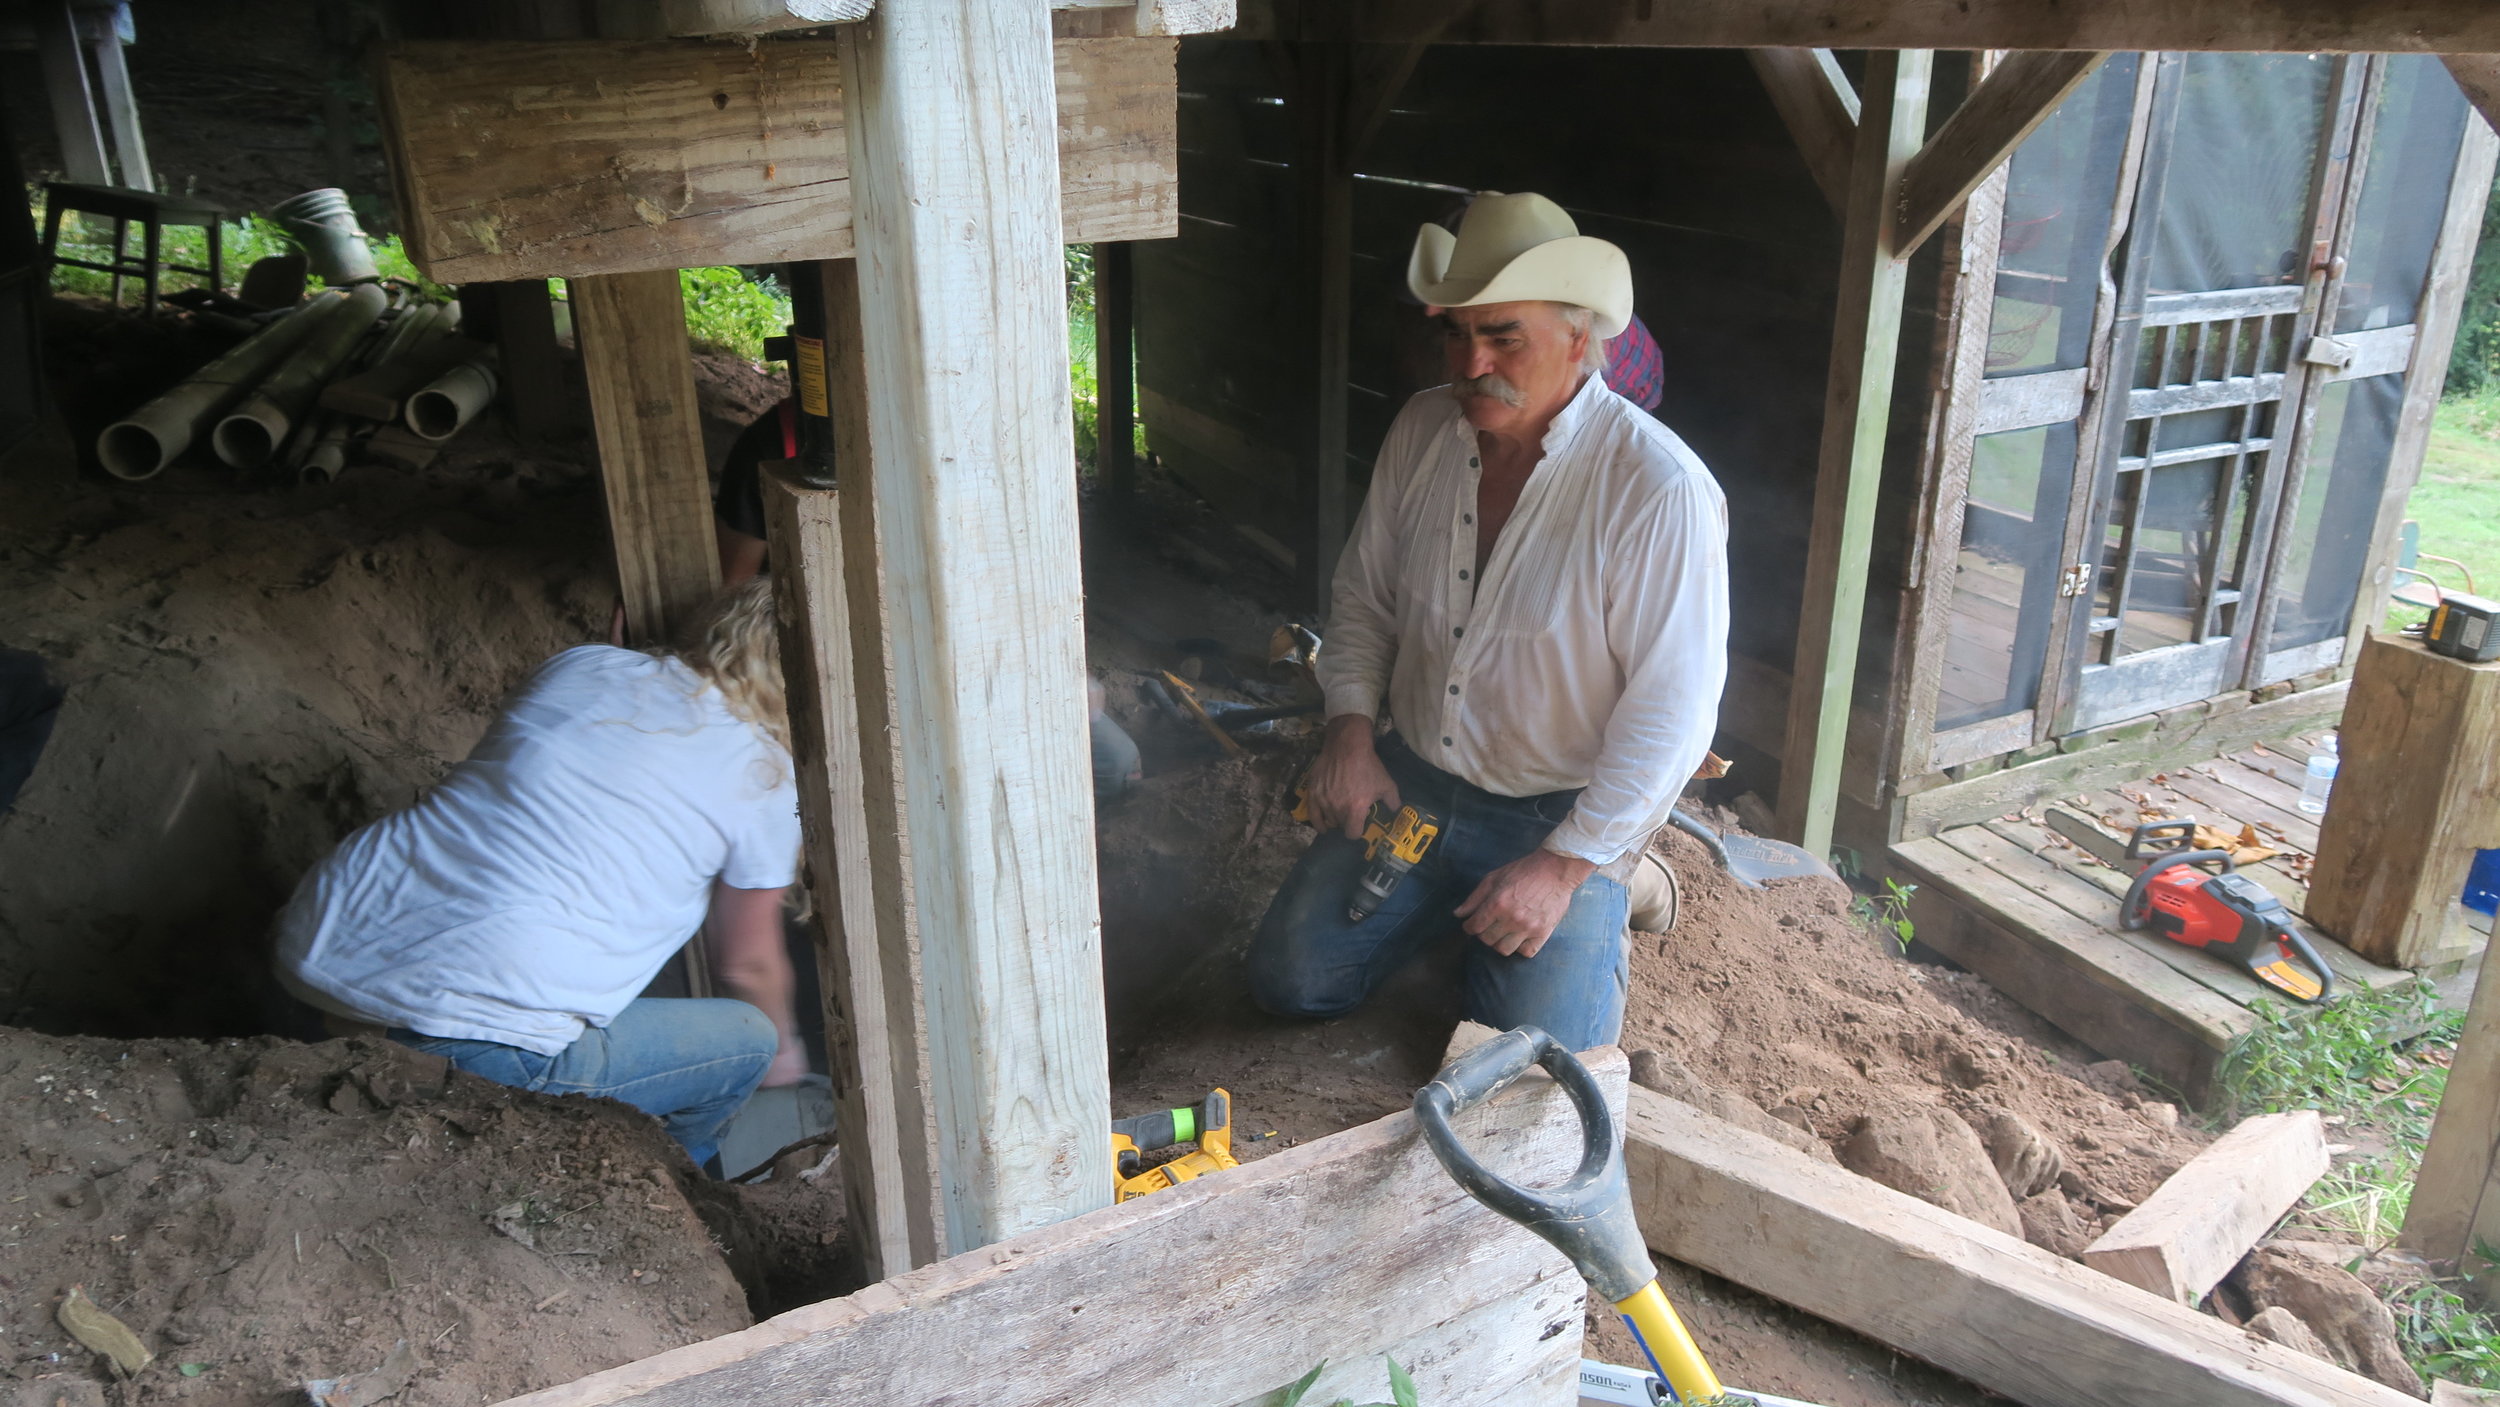  Marty Raney right, helps shore up support beams under the house. Photo by Natalie Munio   